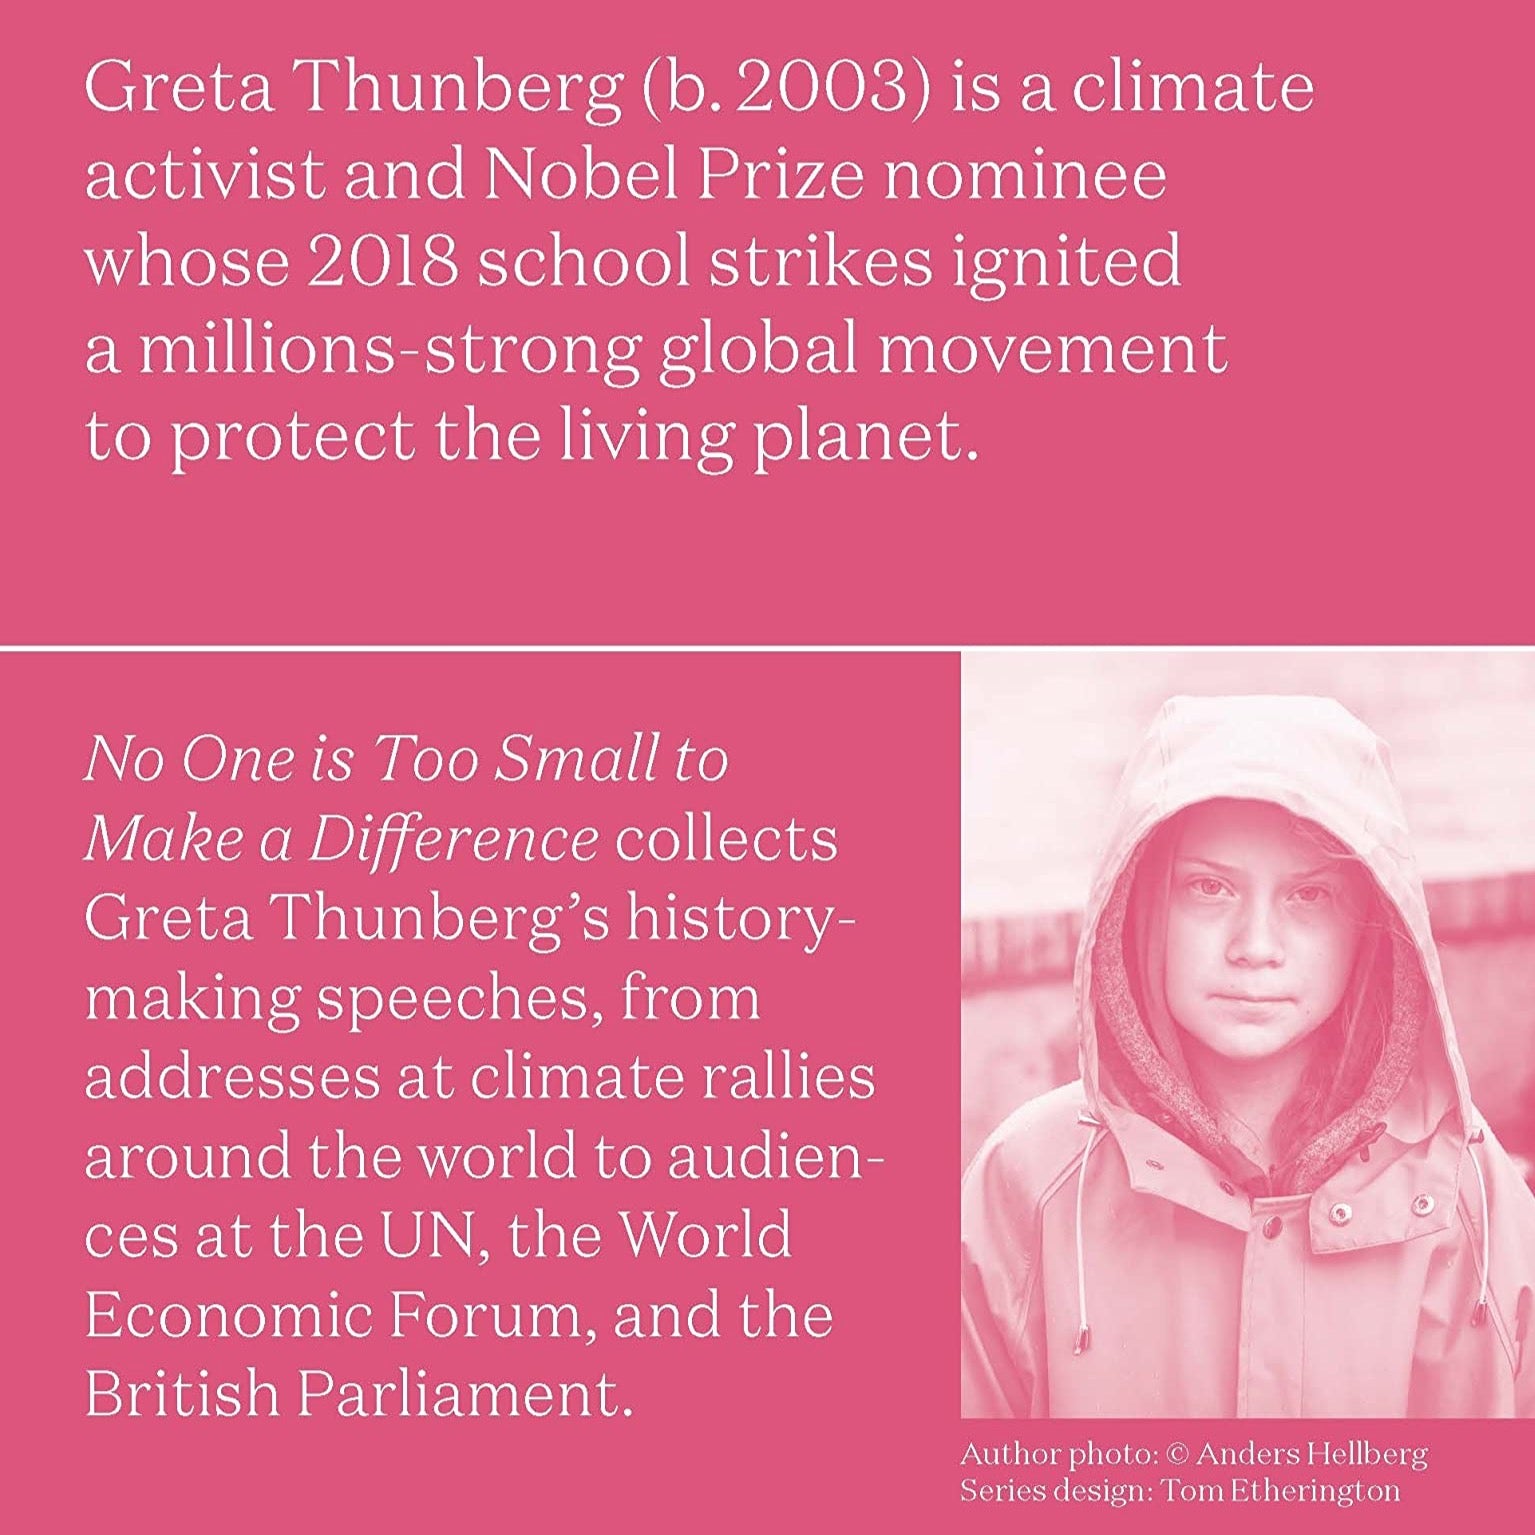 No One is Too Small to Make a Difference - Greta Thunberg